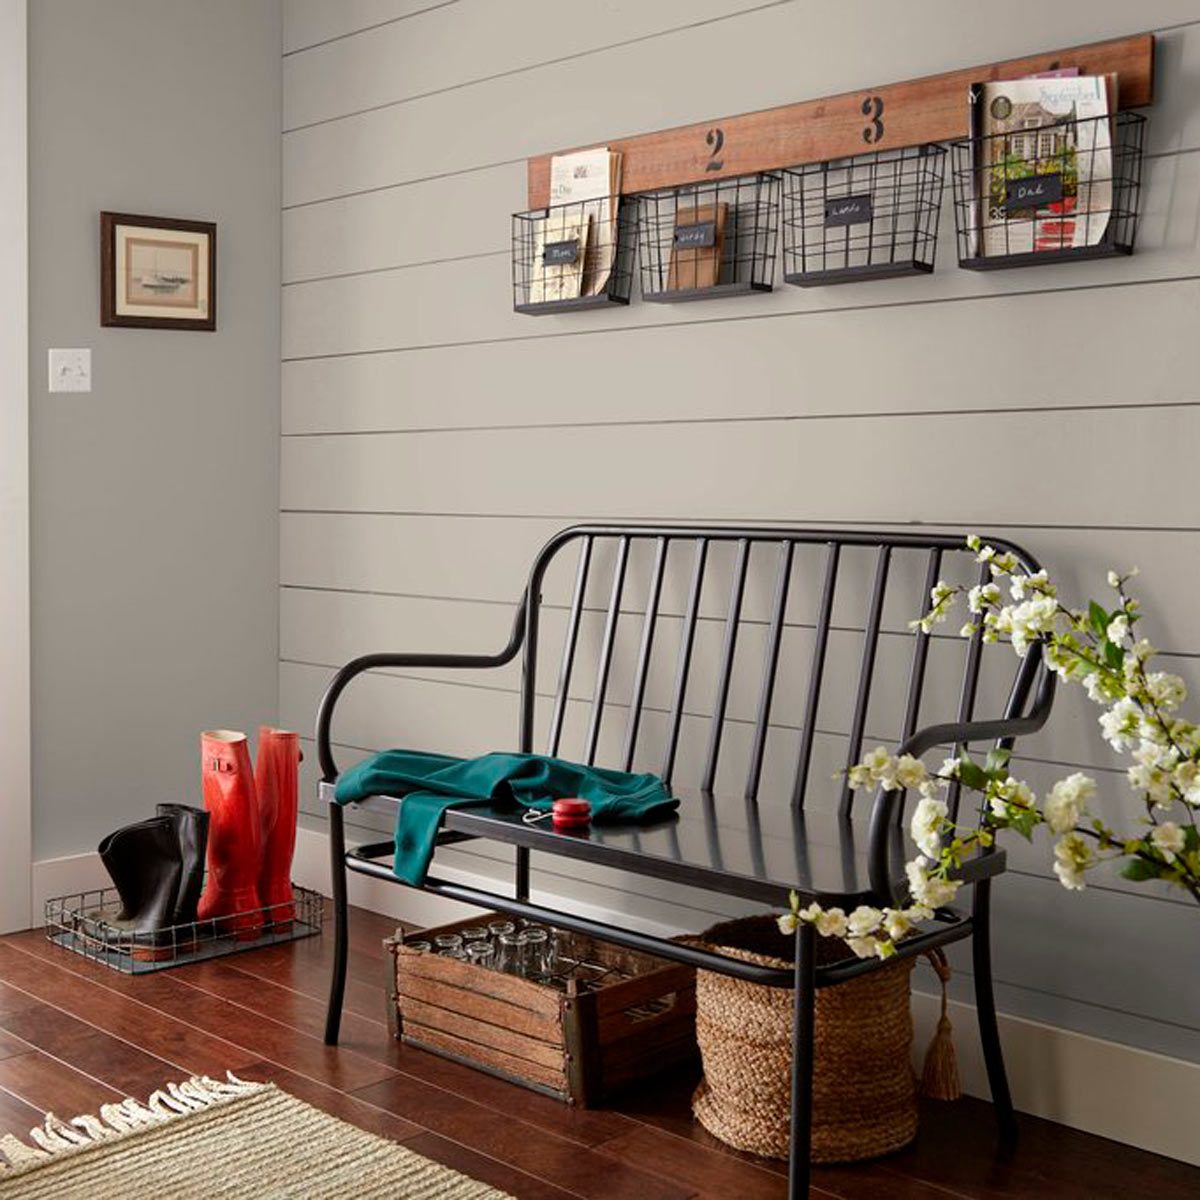 Top 10 Grays for Your Walls